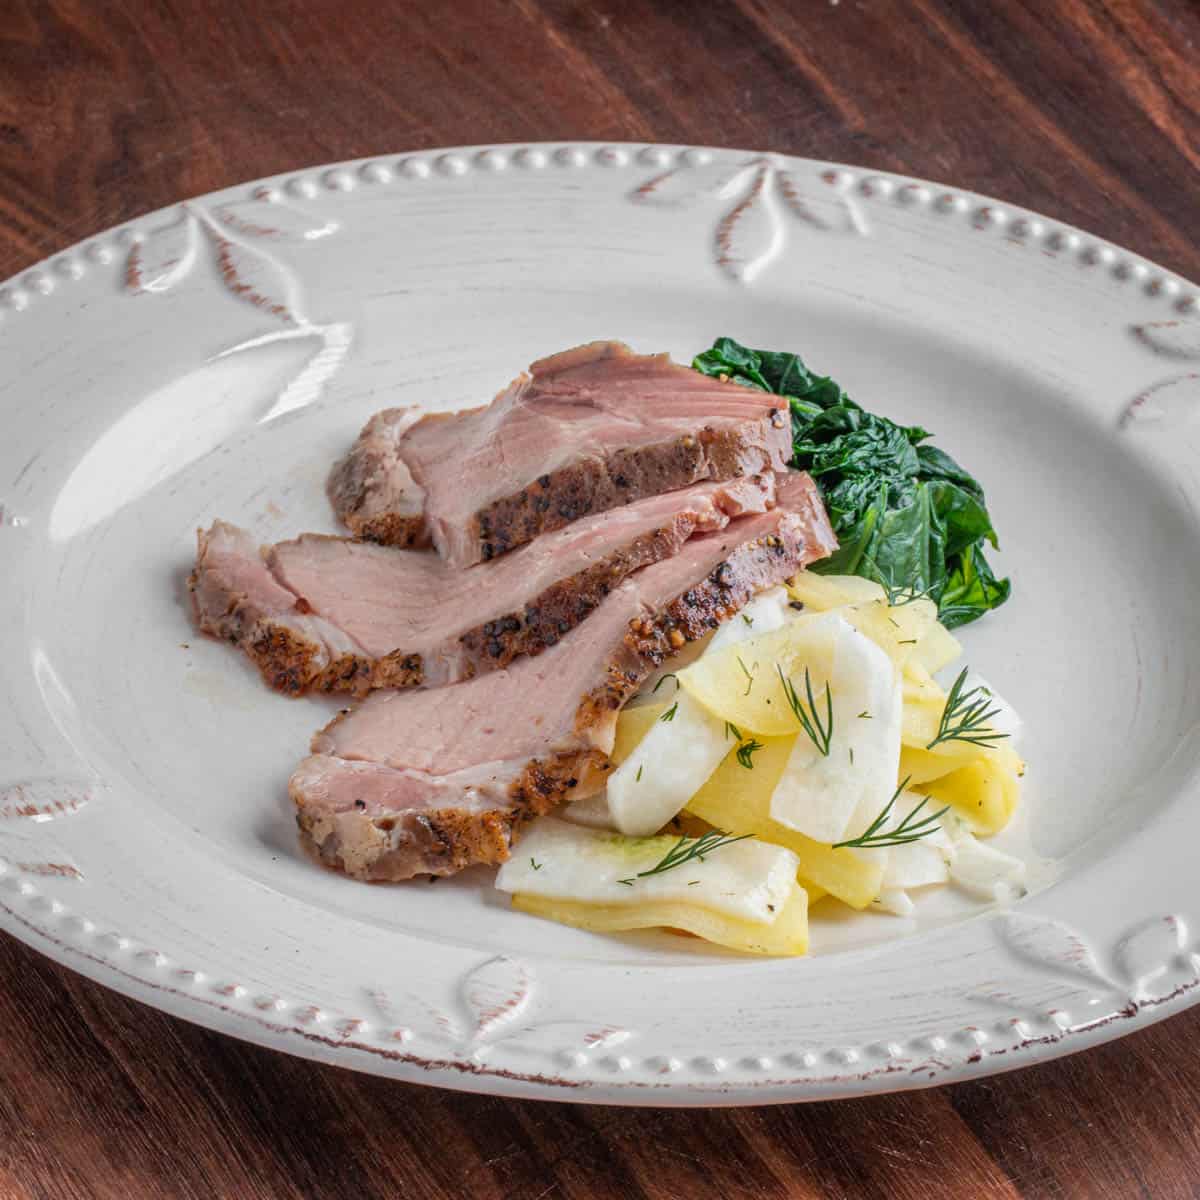 a cooked pork ribeye served with sauerkraut and apples.